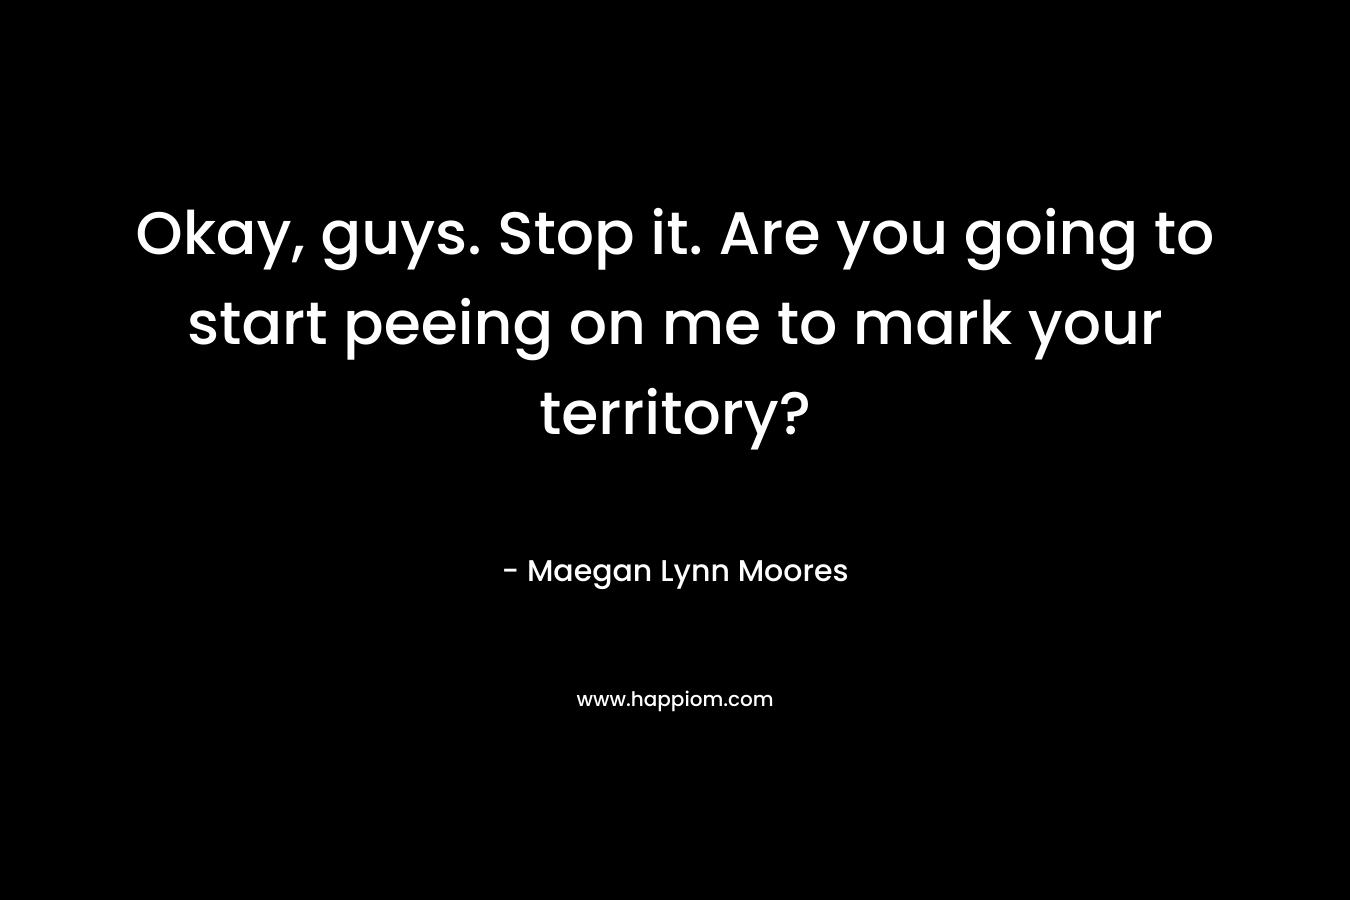 Okay, guys. Stop it. Are you going to start peeing on me to mark your territory? – Maegan Lynn Moores